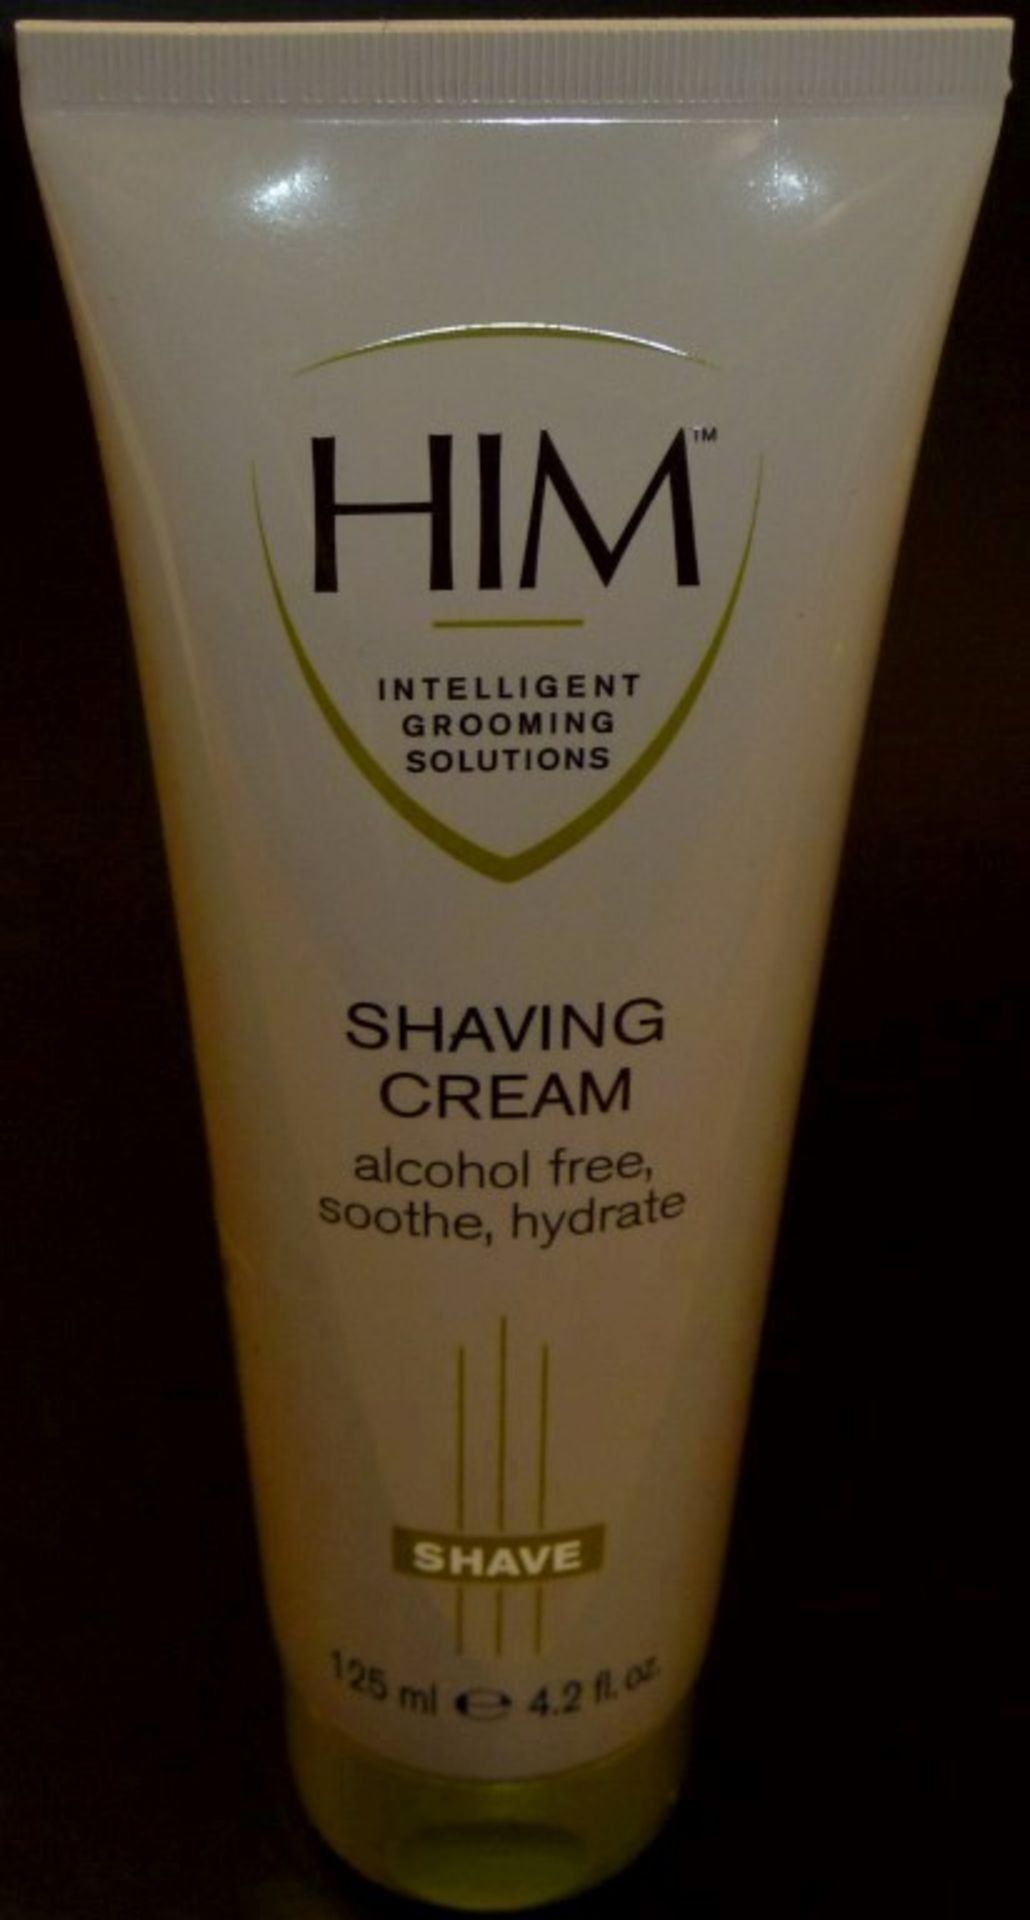 20 x HIM Intelligent Grooming Solutions - 125ml SHAVING CREAM - Brand New Stock - Alcohol Free, - Image 5 of 5